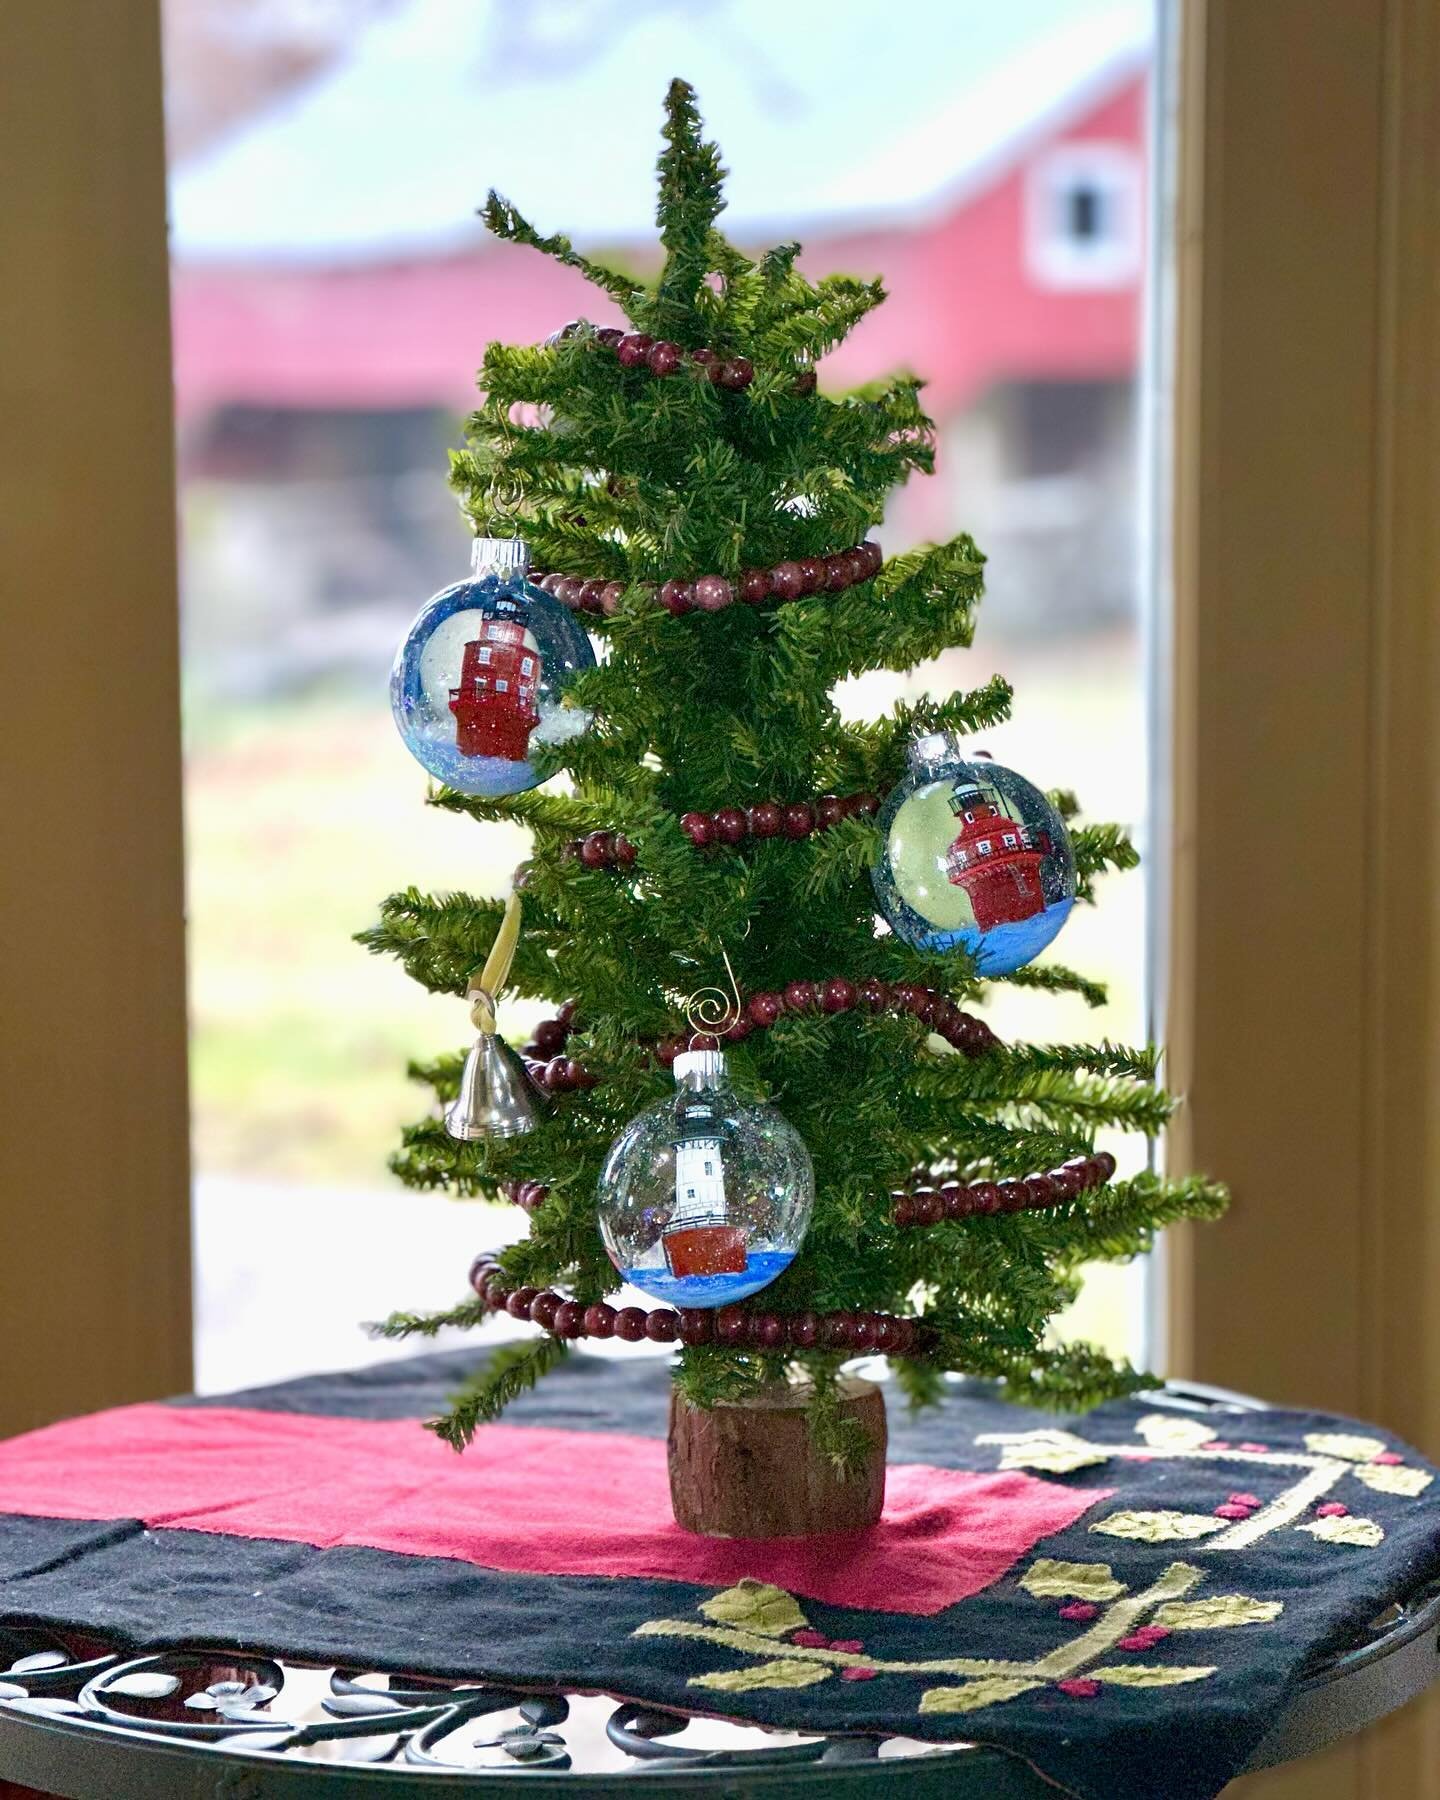 This is what your Christmas tree looks like when you are obsessed with saving lighthouses in the Chesapeake Bay 😁
Thank you Virginia Coyle for the beautiful hand painted ornaments of Hooper Island, Wolf Trap and ??? Lighthouses (Big announcement com